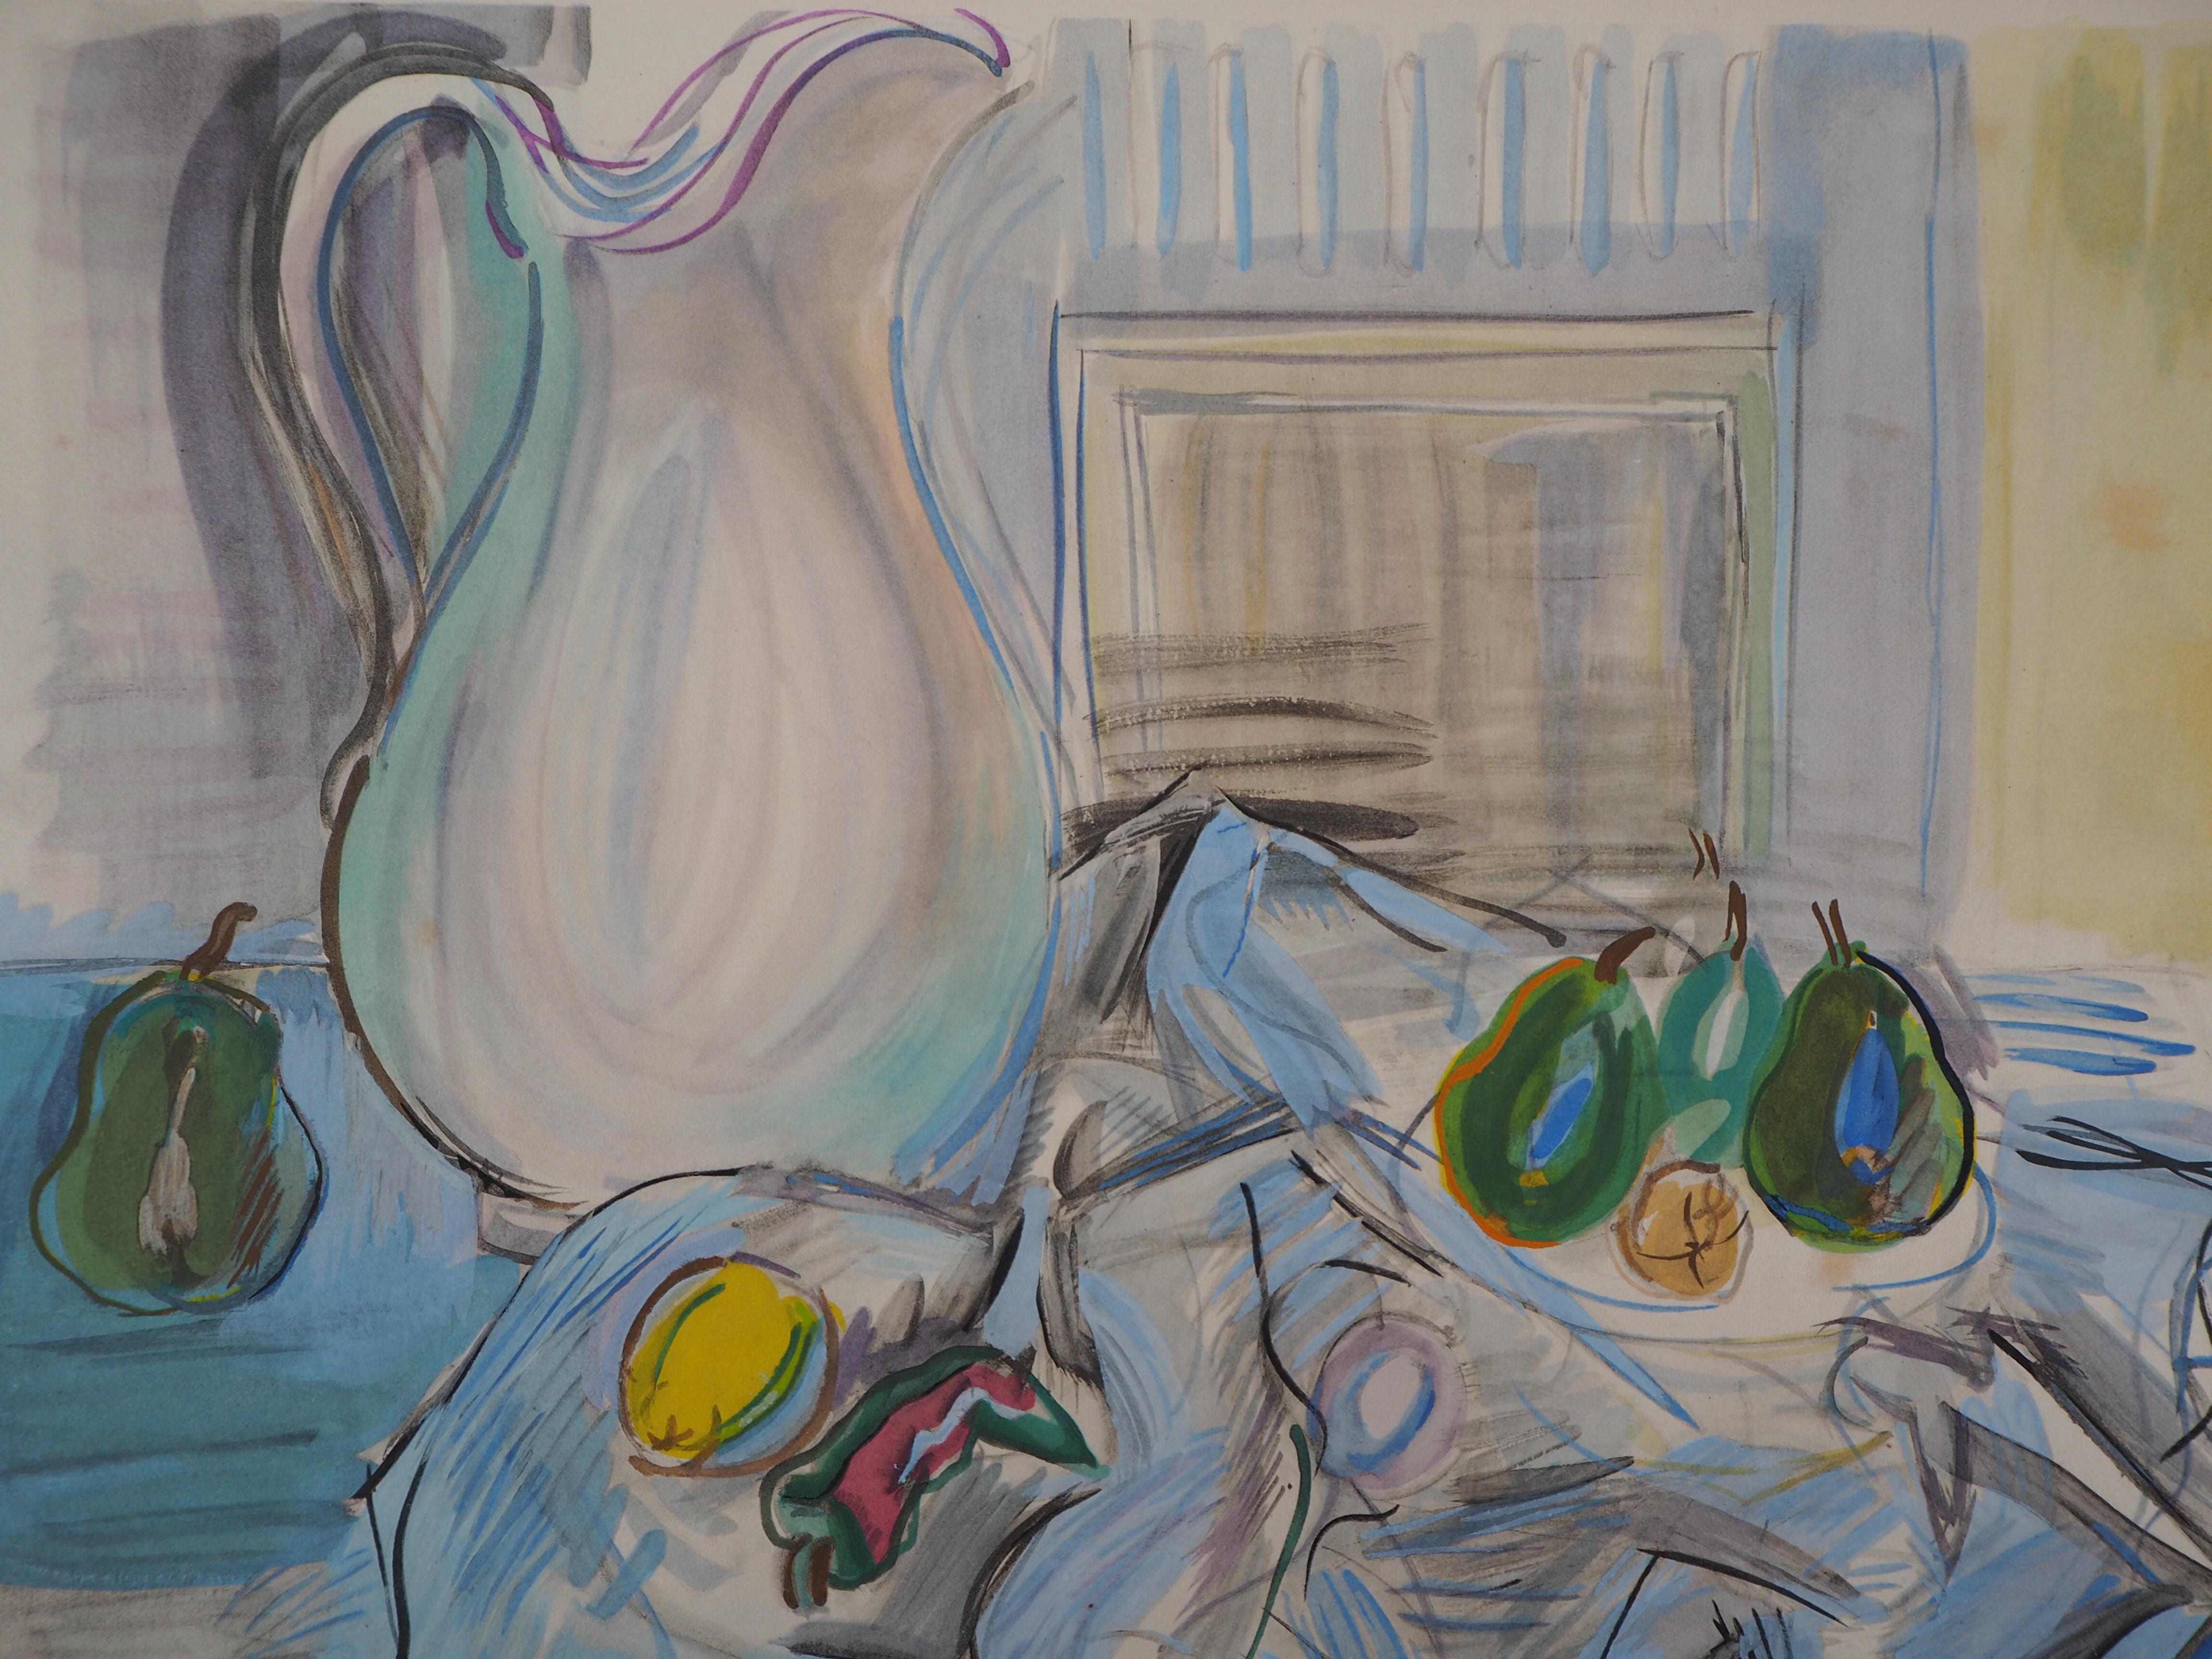 Still Life with White Pot and Pears - Original Lithograph - Print by Raoul Dufy